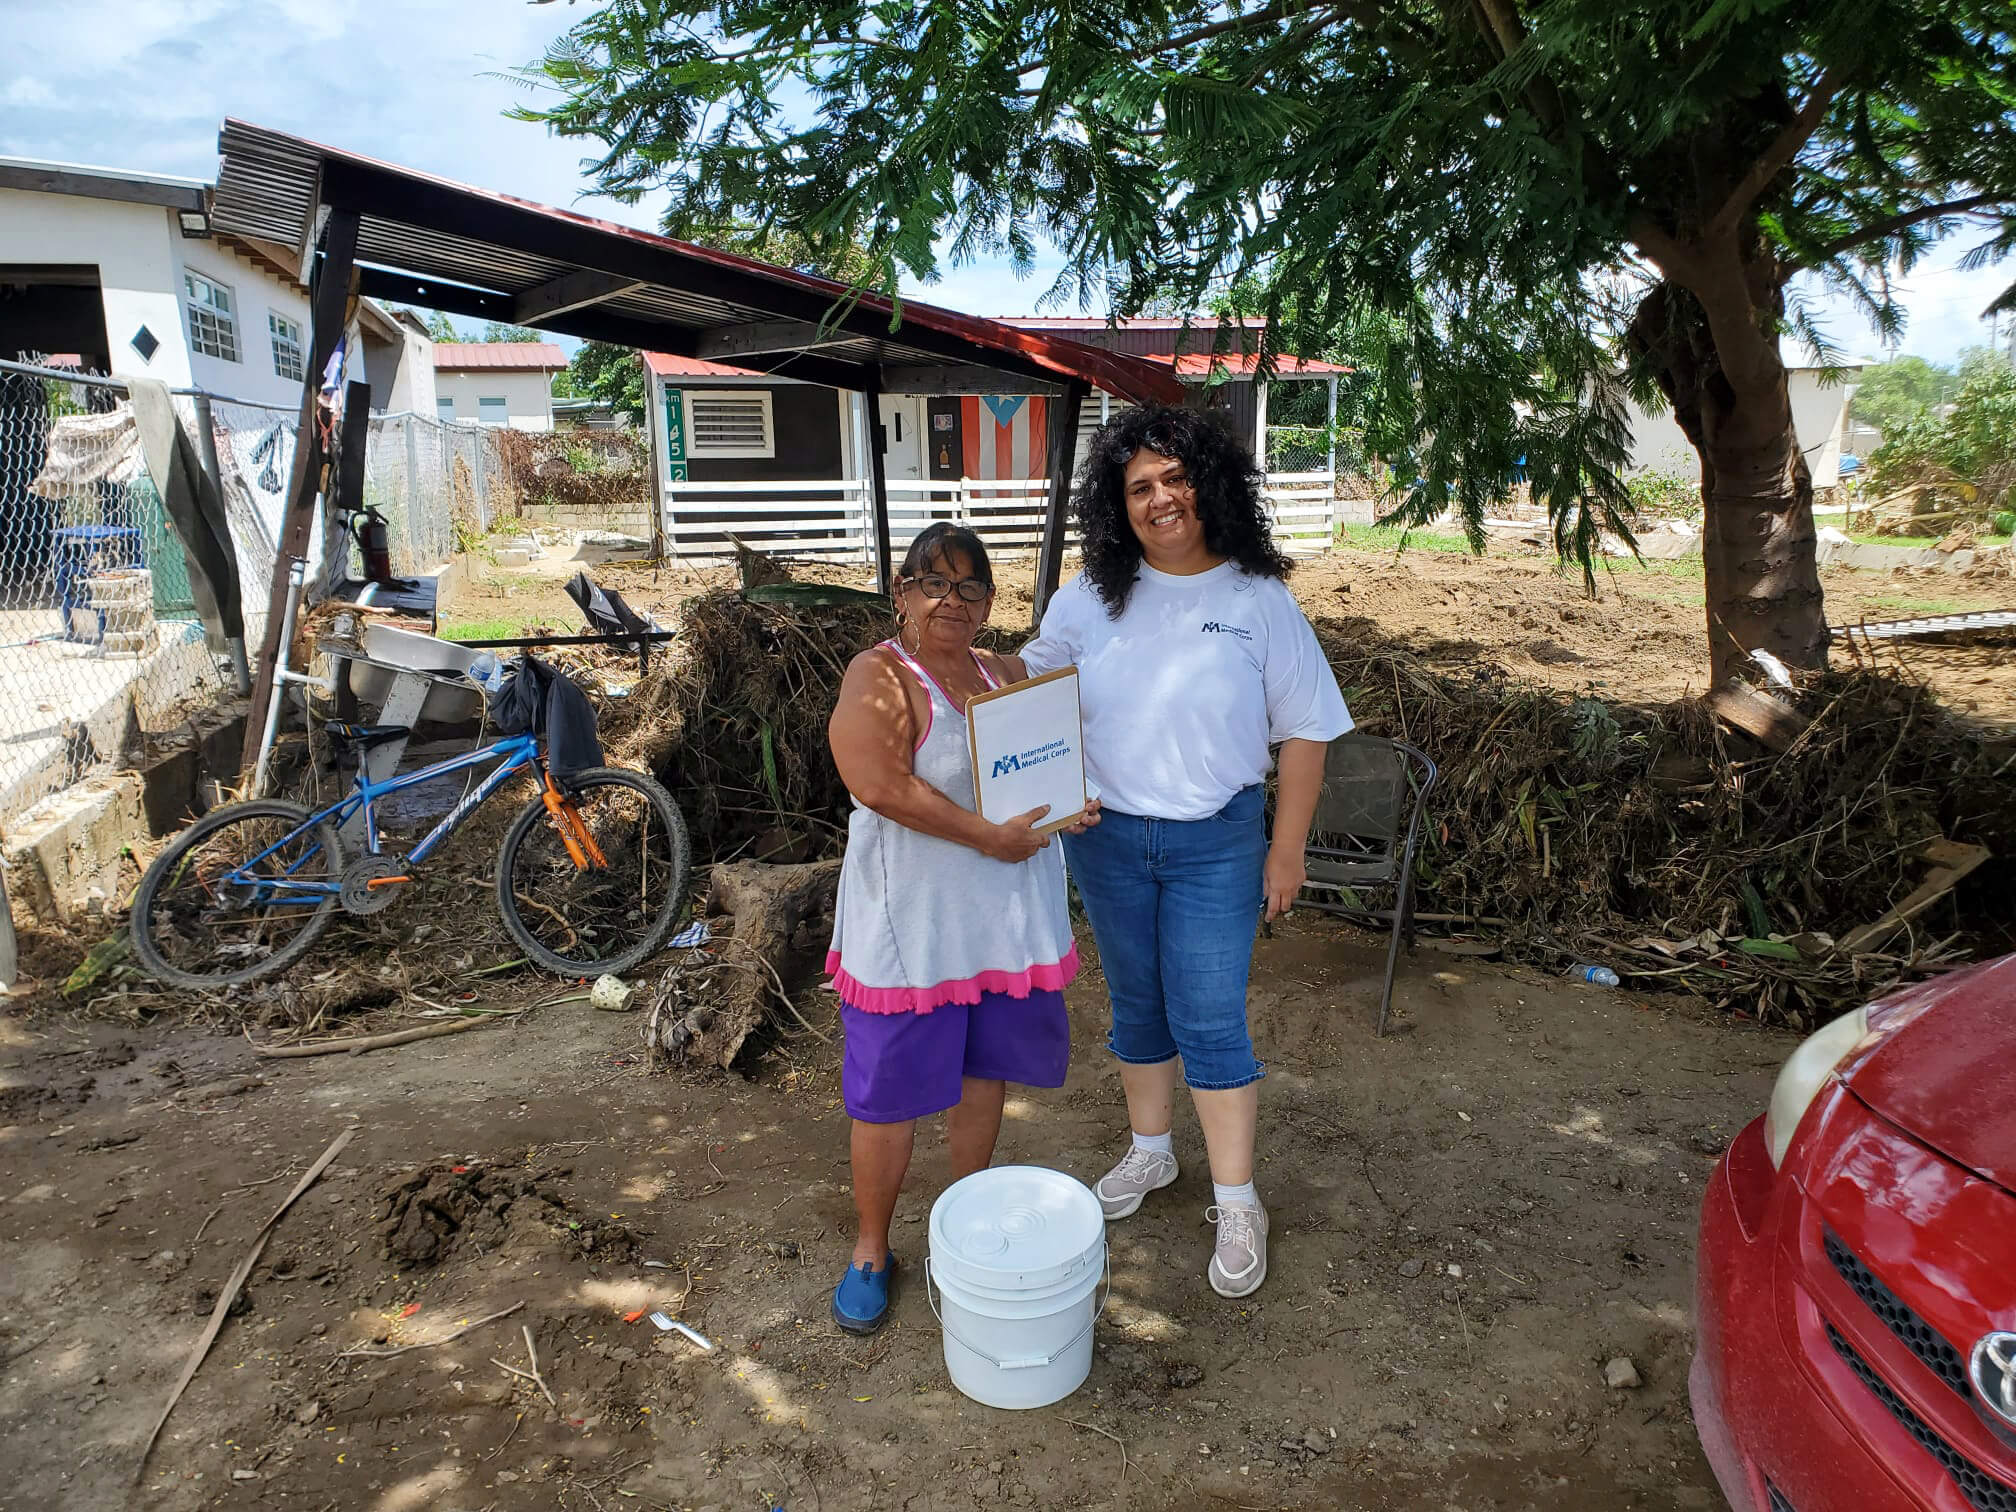 Nelida (left) is one of the people in the Salinas municipality of Puerto Rico whom we provided care to after 2022’s Hurricane Fiona. Though “the water destroyed everything,” Nelida told our teams how grateful she was to receive our support, saying, “You arrived at a precious moment. You and others came to help and provide medical care. Medically speaking, this community was destroyed.”